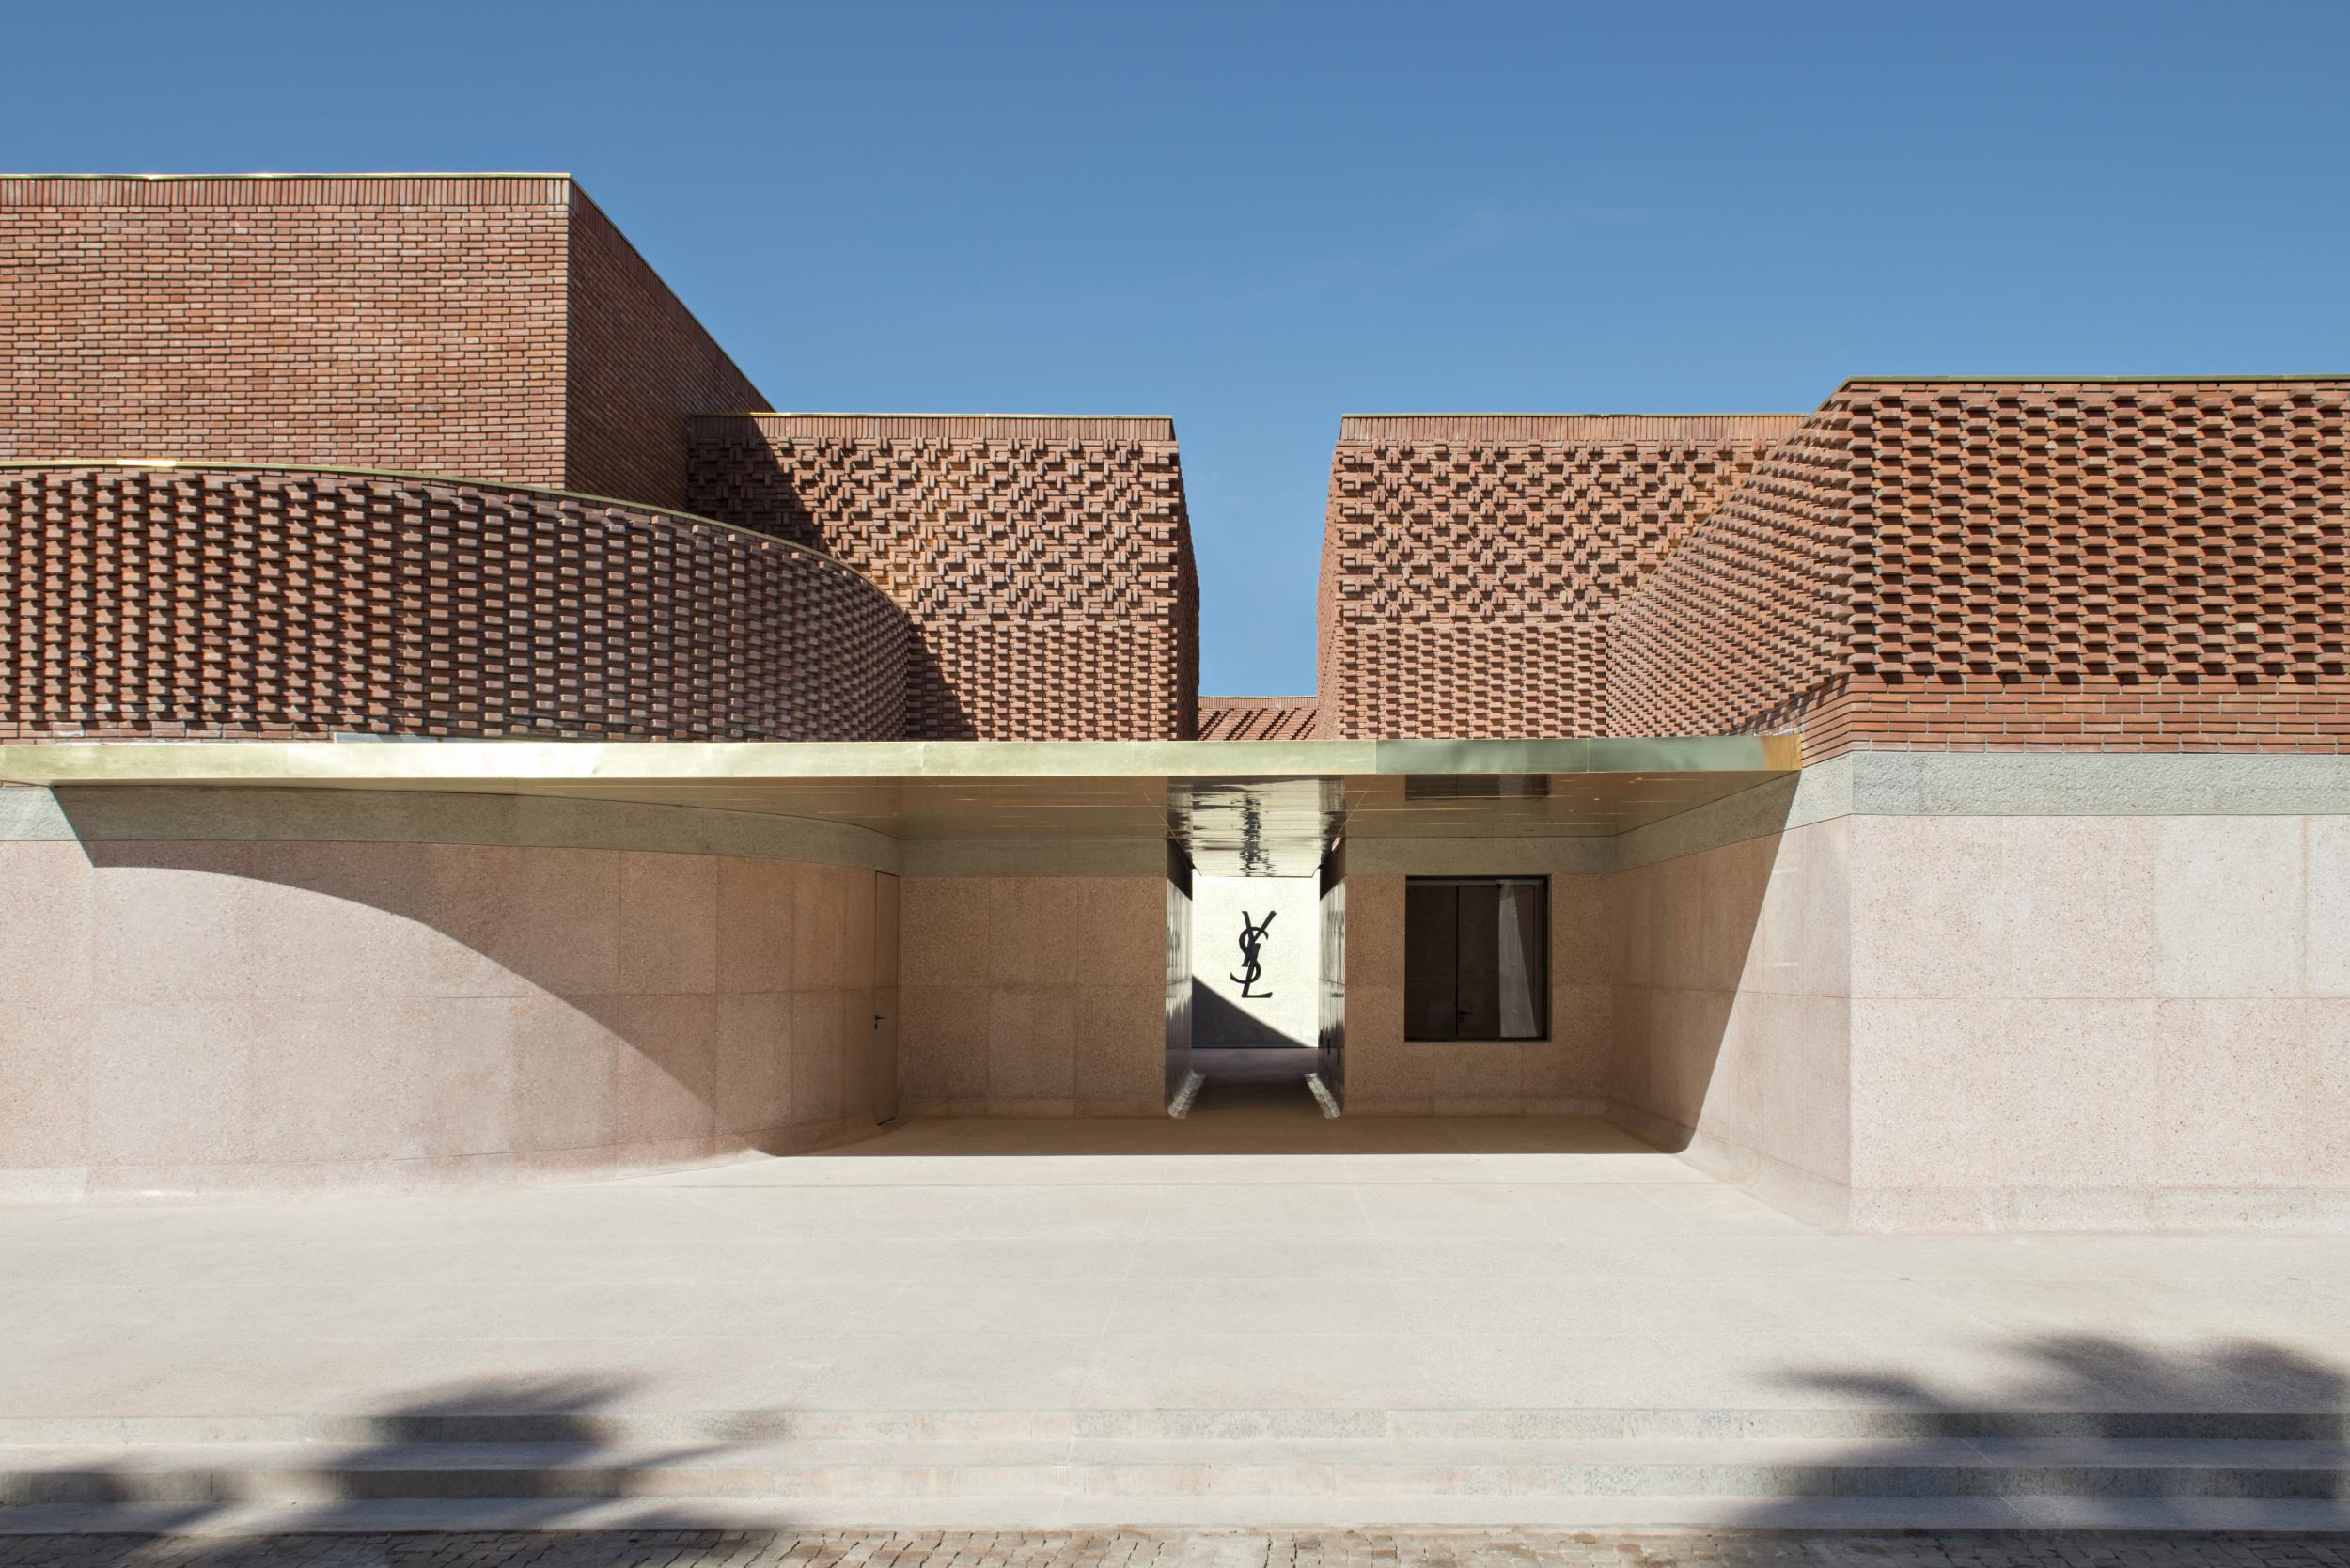 &#13;
The YSL Museum has paved the way for Marrakech’s cultural revival &#13;